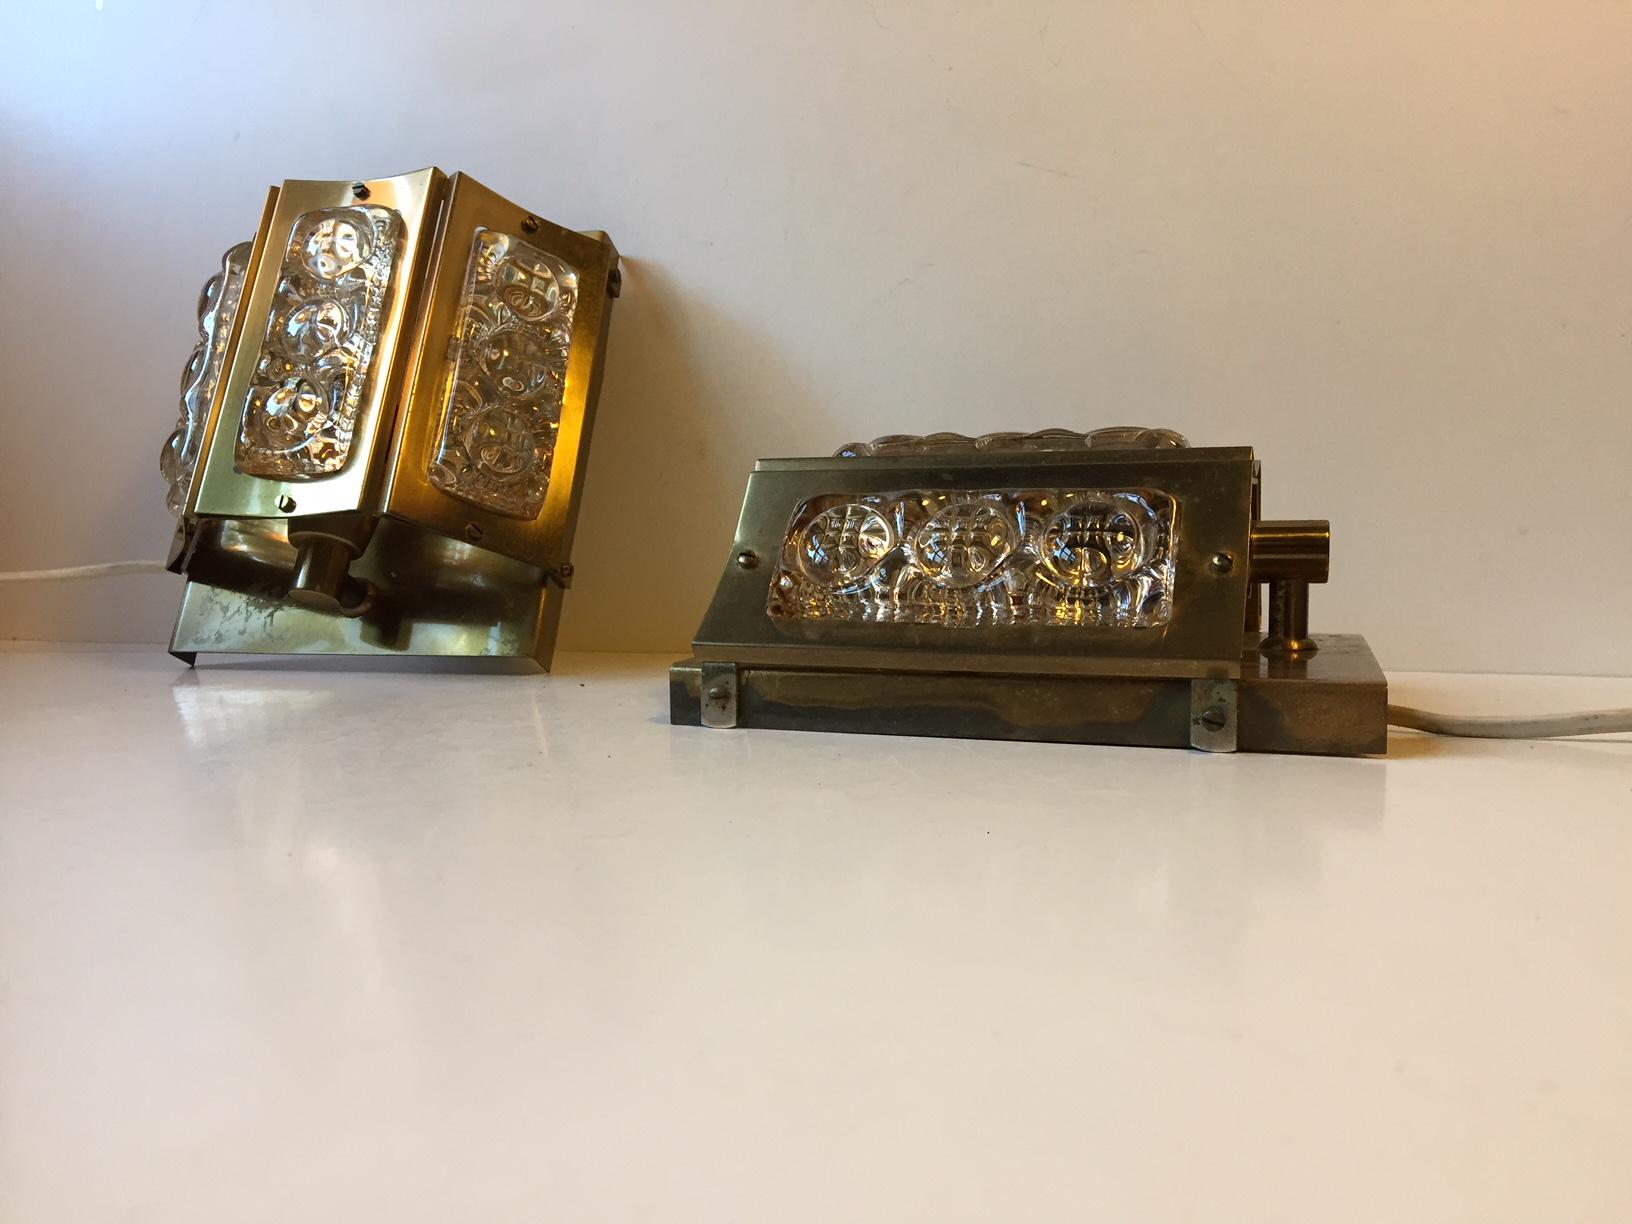 These sconces were manufactured and designed by Vitrika in Denmark in the 1960s. Tis model is made from solid brass set with thick textured glass panels.